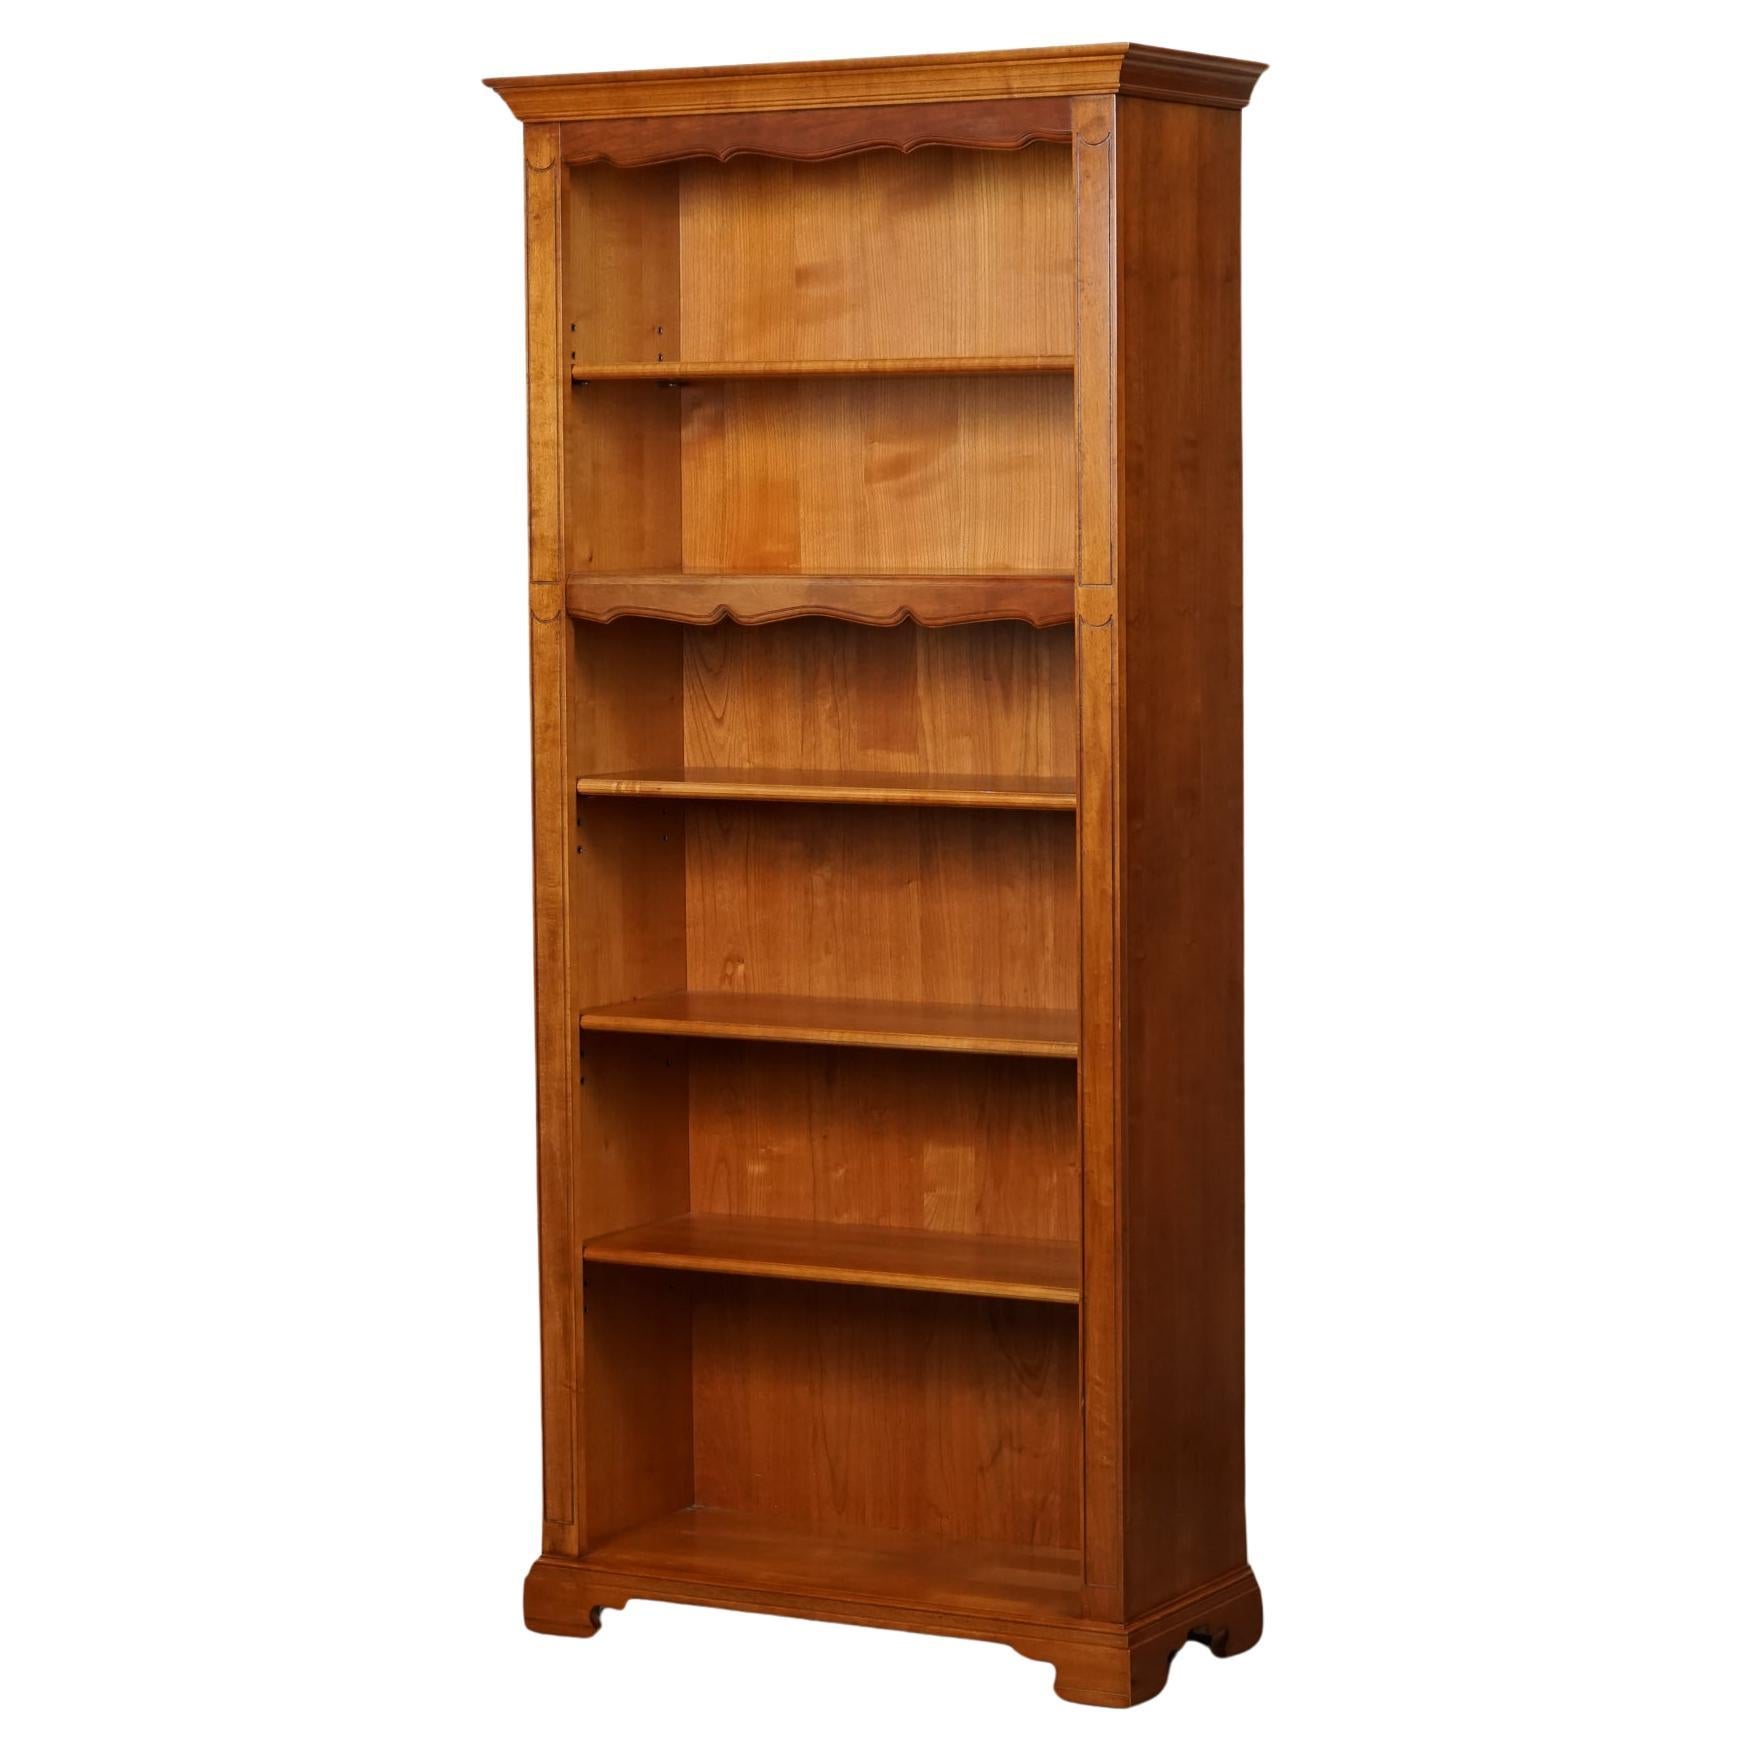 VINTAGE TALL OPEN SOLID BOOKCASE 5 SHELVES MADE BY YOUNGER FURNITURE LONDON j1 For Sale